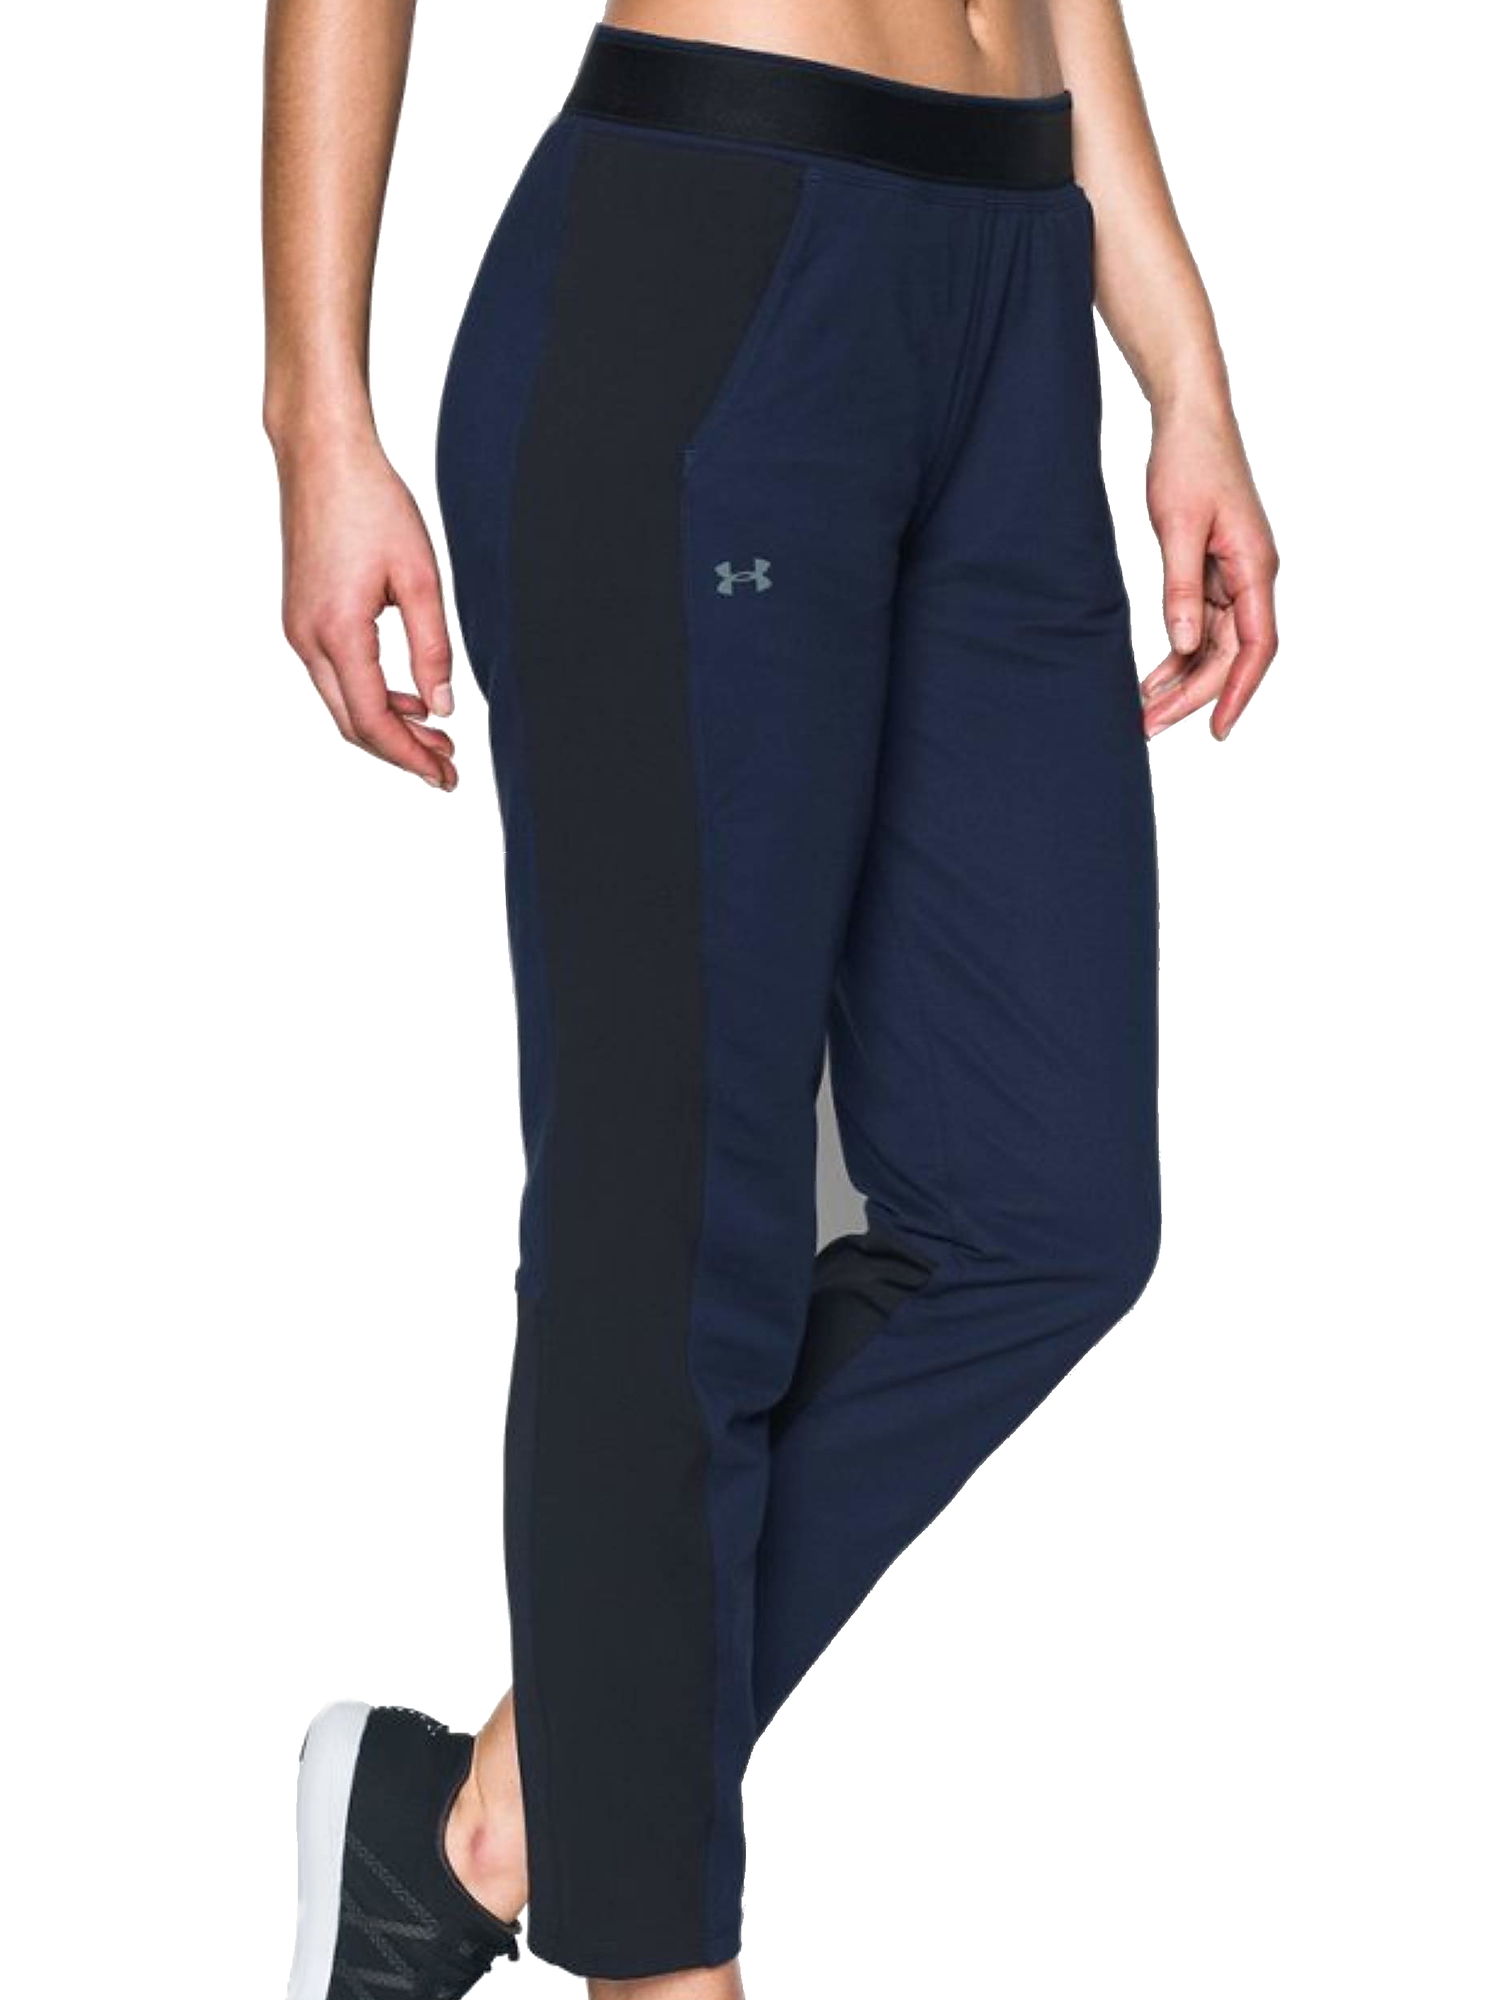 Under Armour Leisure Trousers Womens HeatGear Sweatpants (XLarge, Midnight Navy) - image 1 of 1